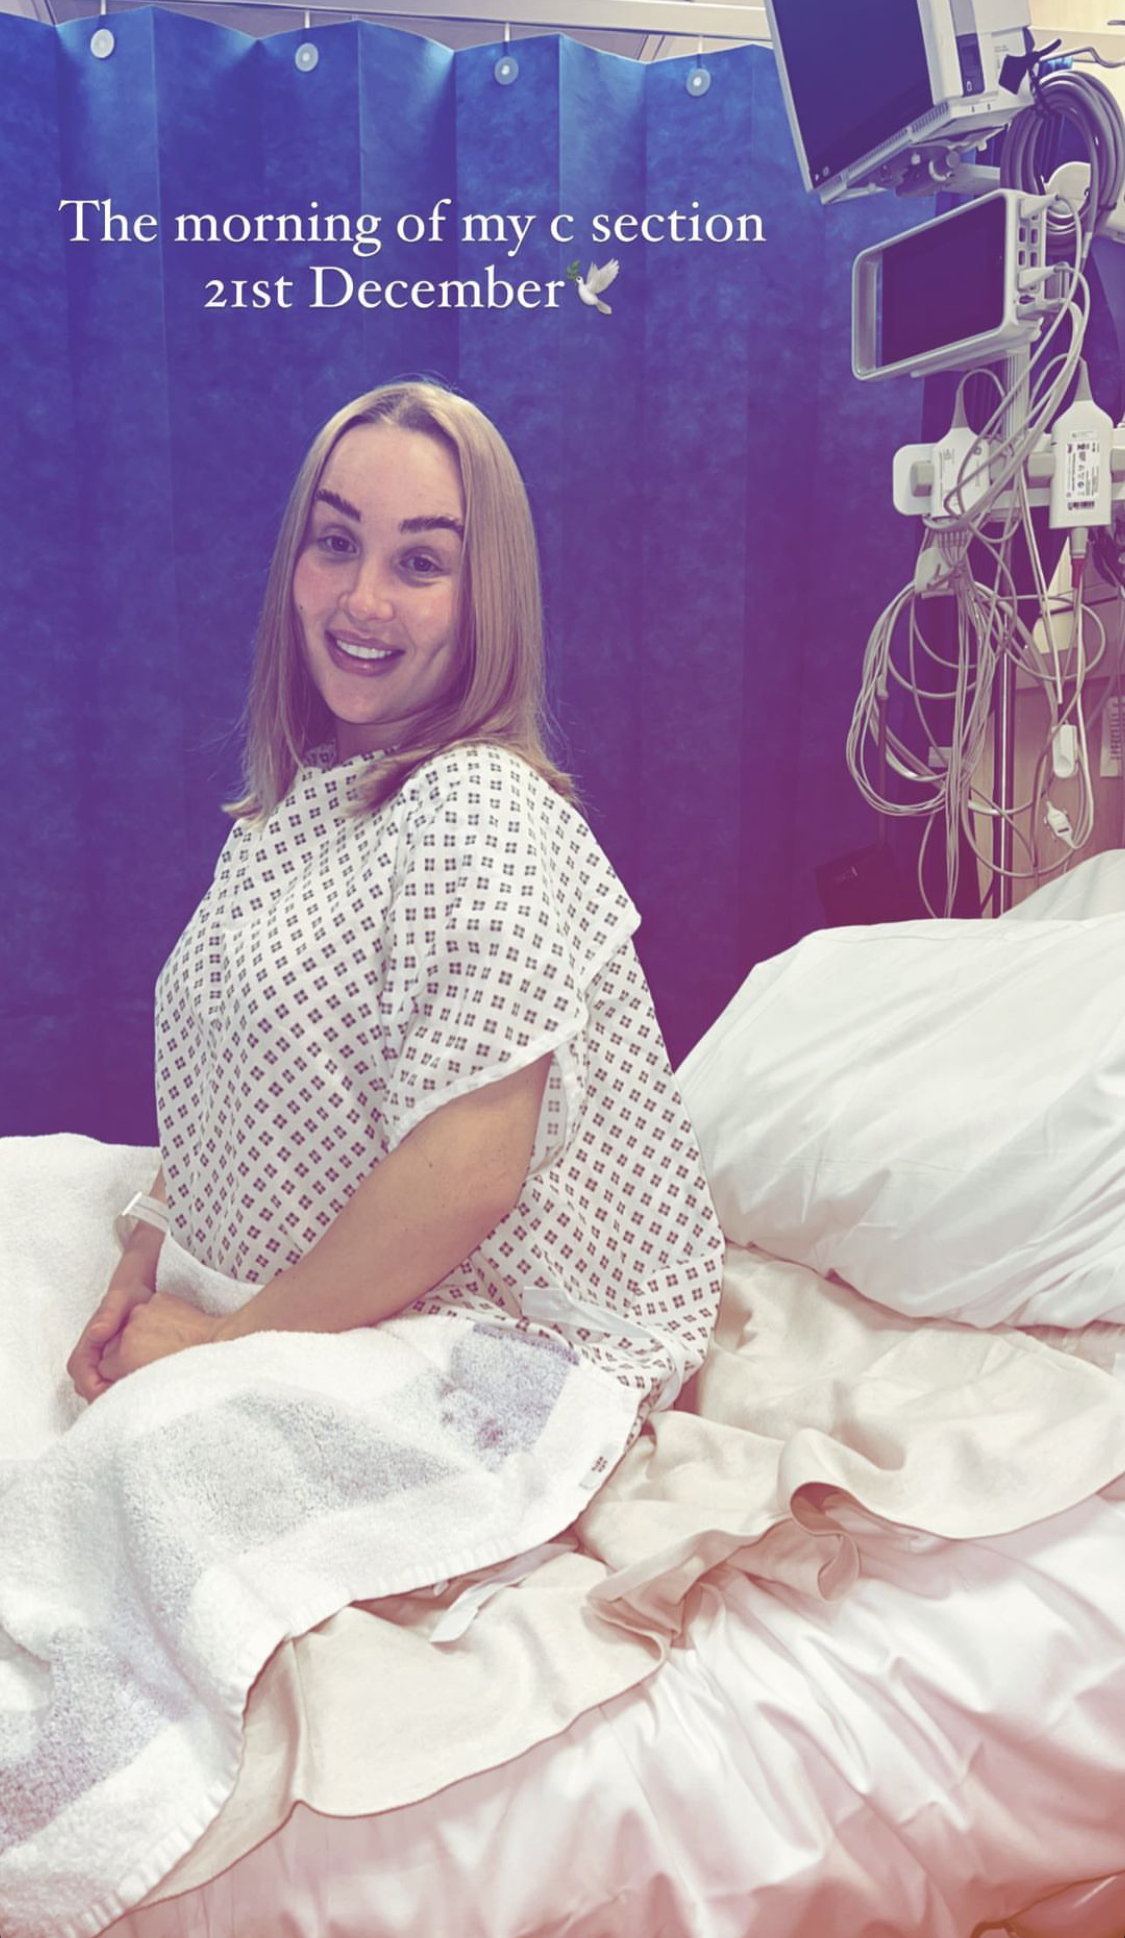 Ex On The Beach star gives birth to third baby after being ‘struck down with illness’